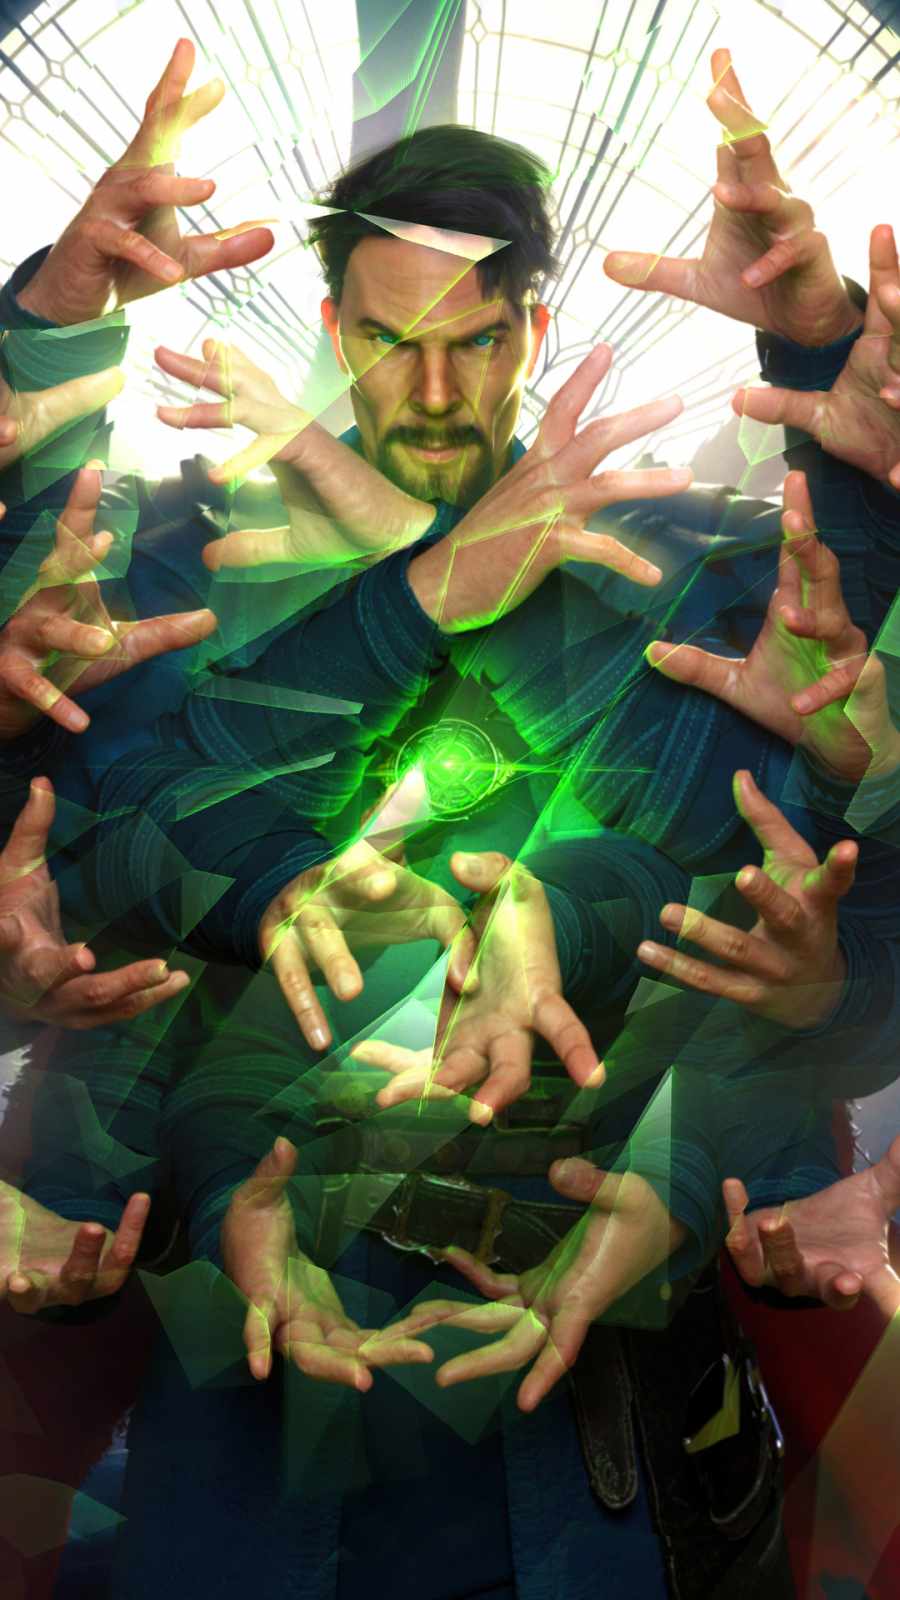 Doctor strange in the multiverse of madness poster 5K iPhone Wallpaper